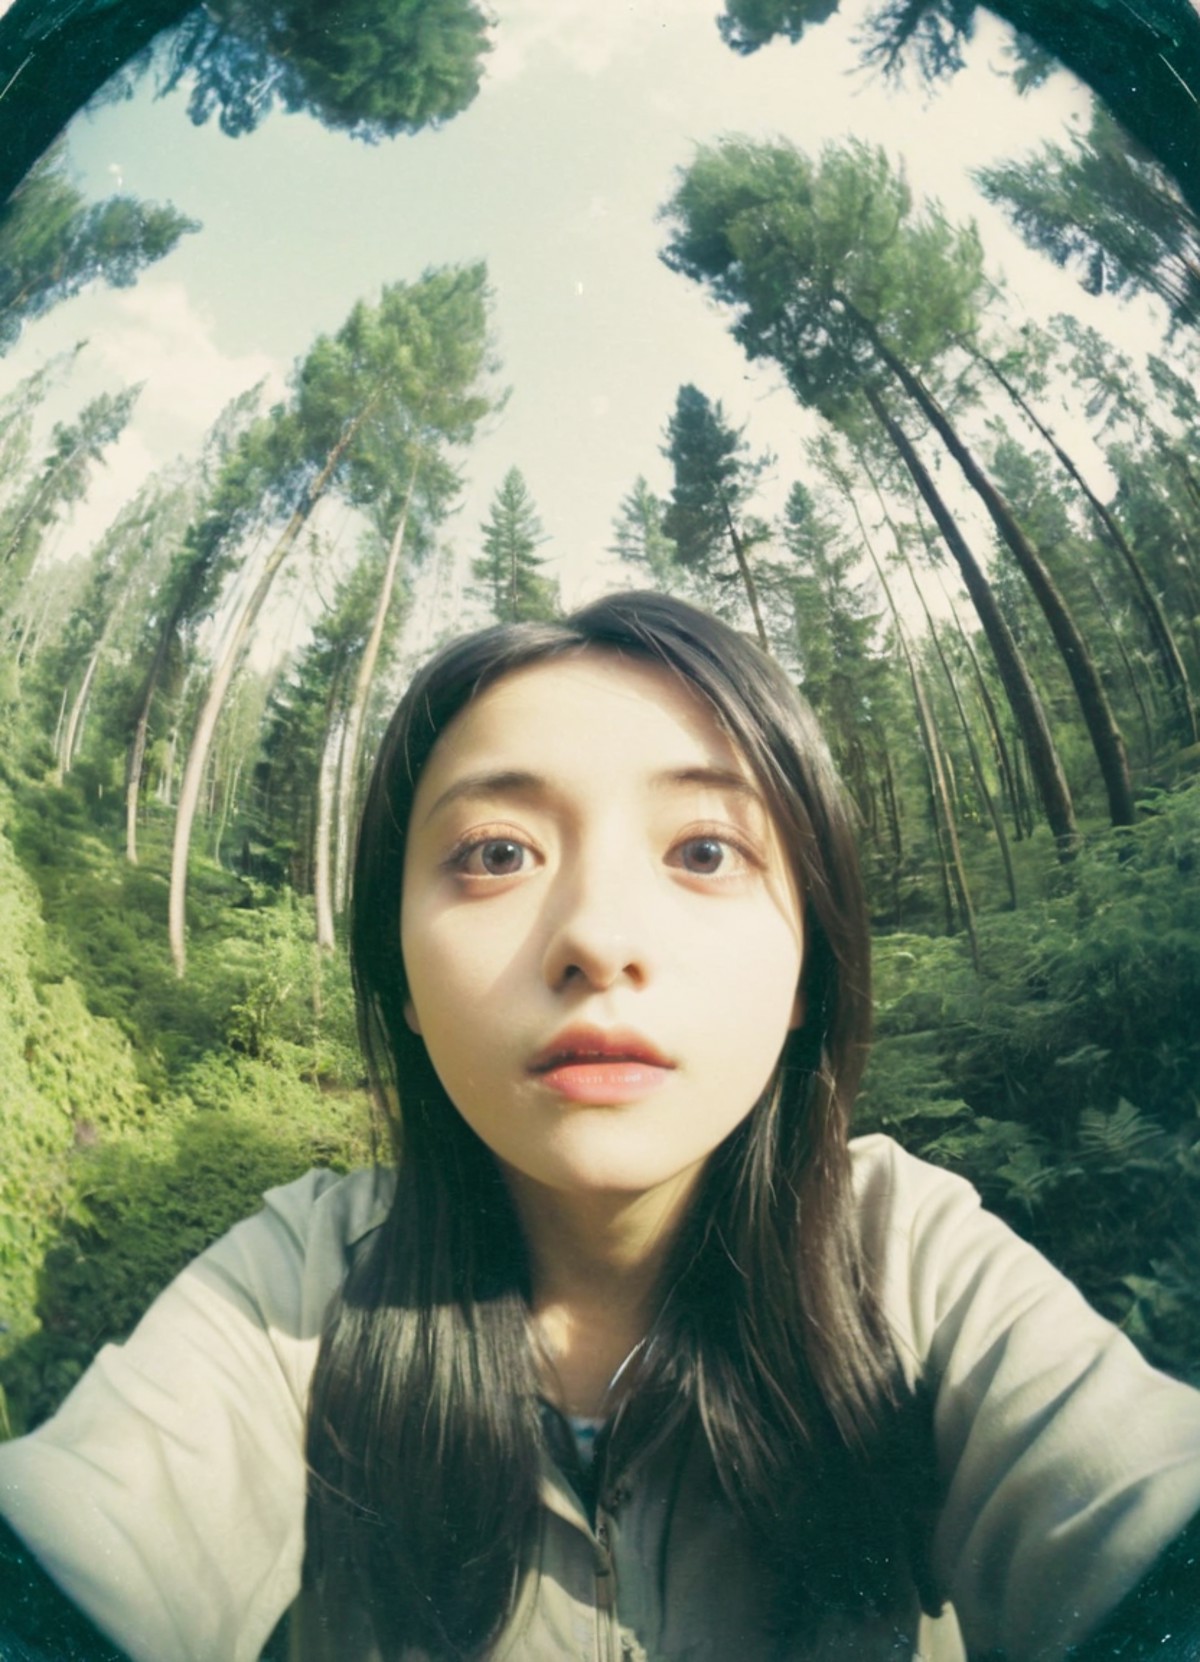 CCTV footage of a 18 age woman look up at forest, Polaroid filterd fish-eye lens